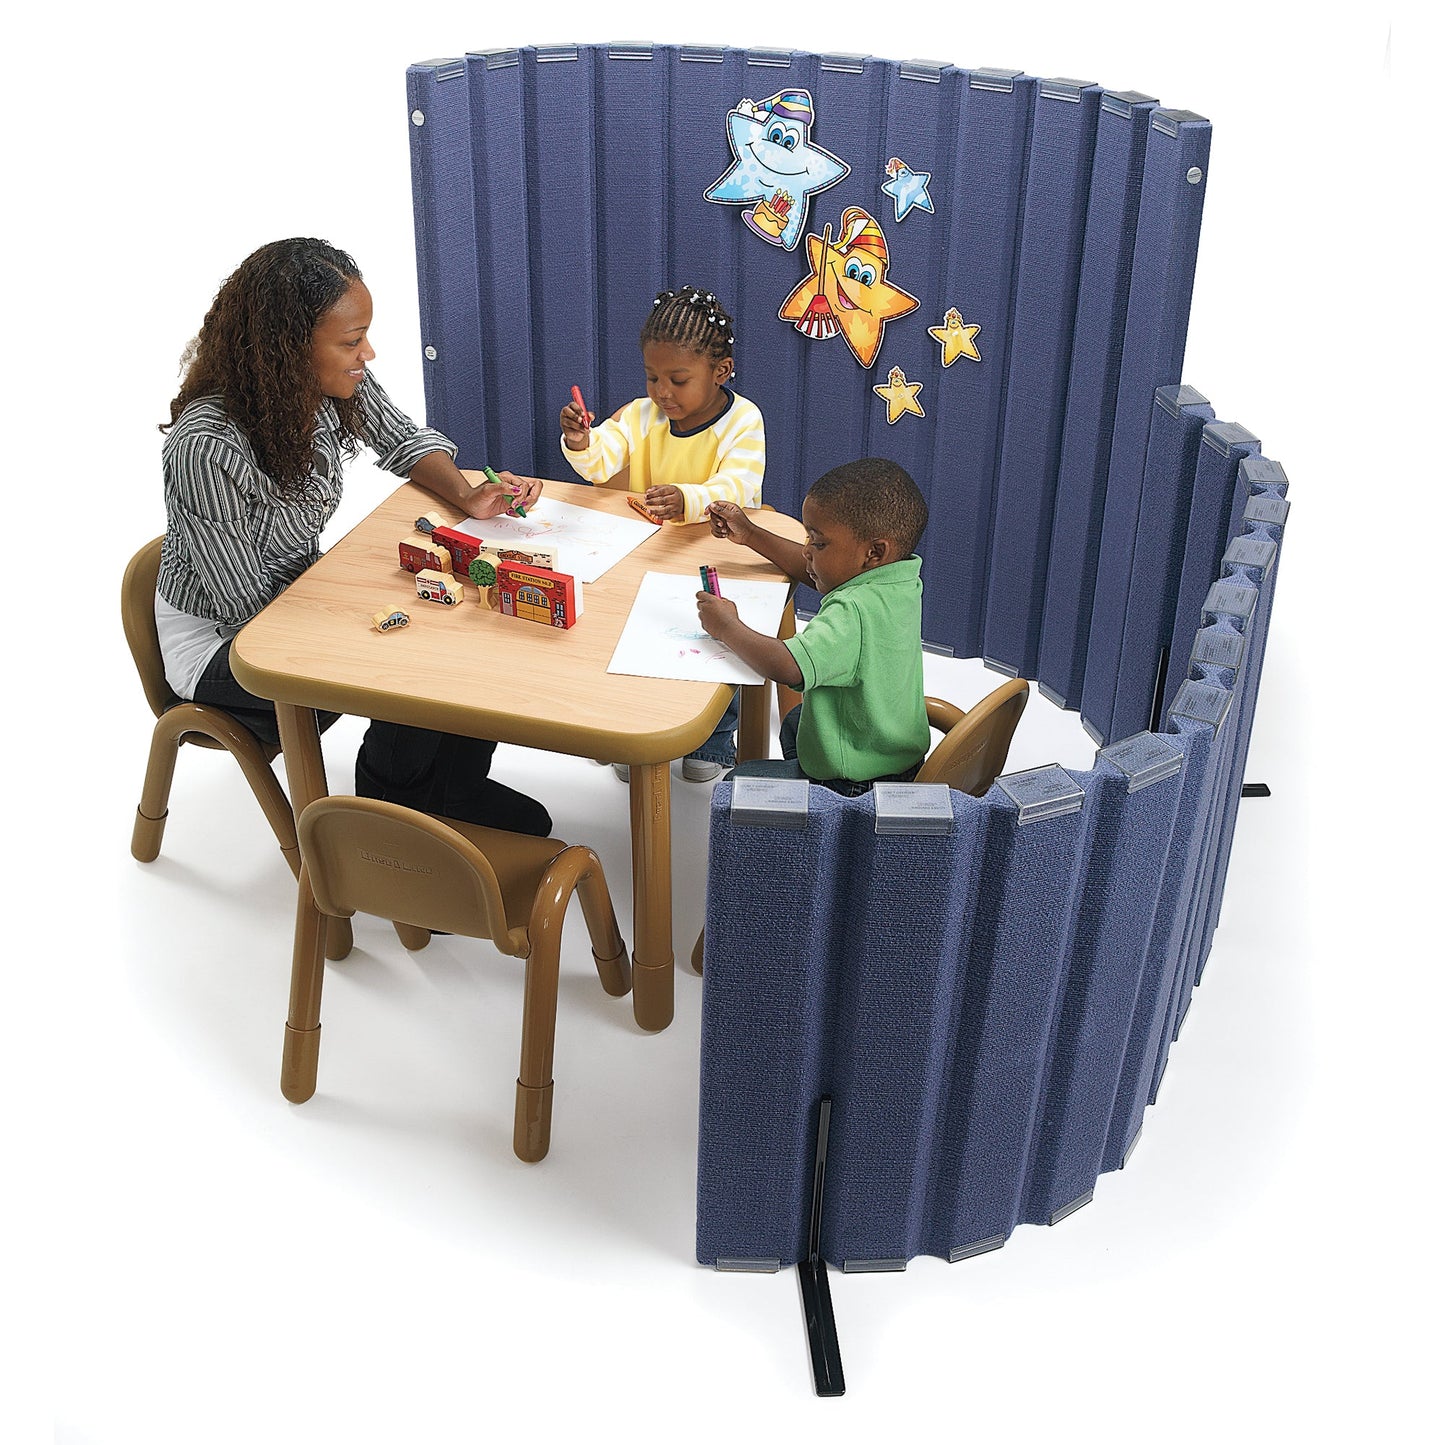 Angeles Quiet Divider with Sound Sponge 48" x 6' Wall (AB8450) - SchoolOutlet